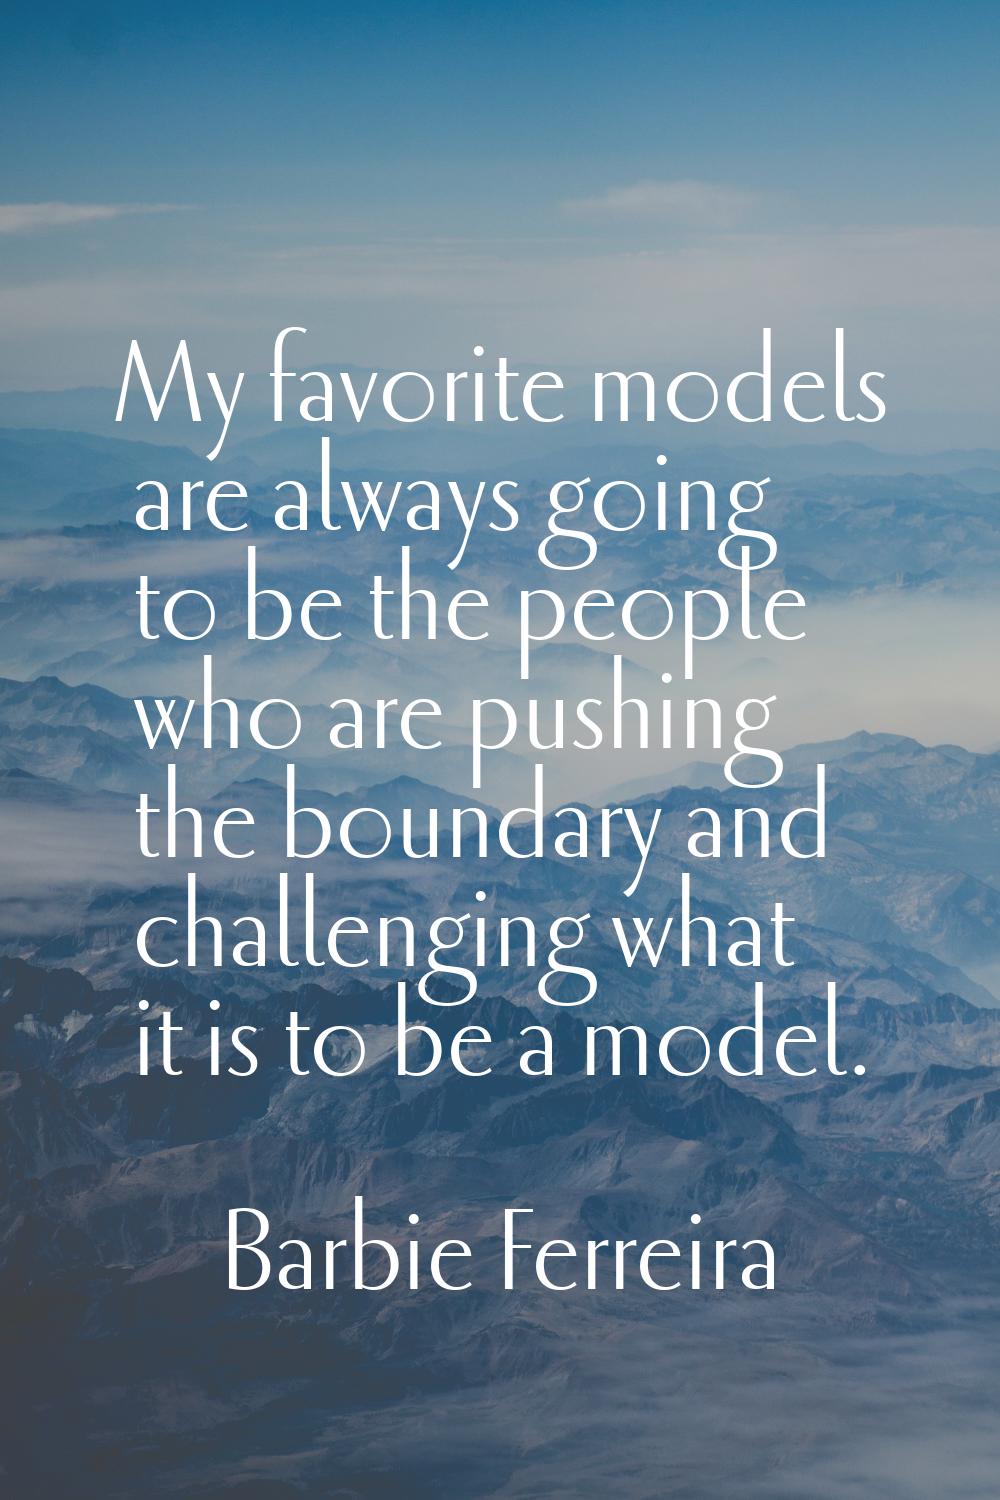 My favorite models are always going to be the people who are pushing the boundary and challenging w